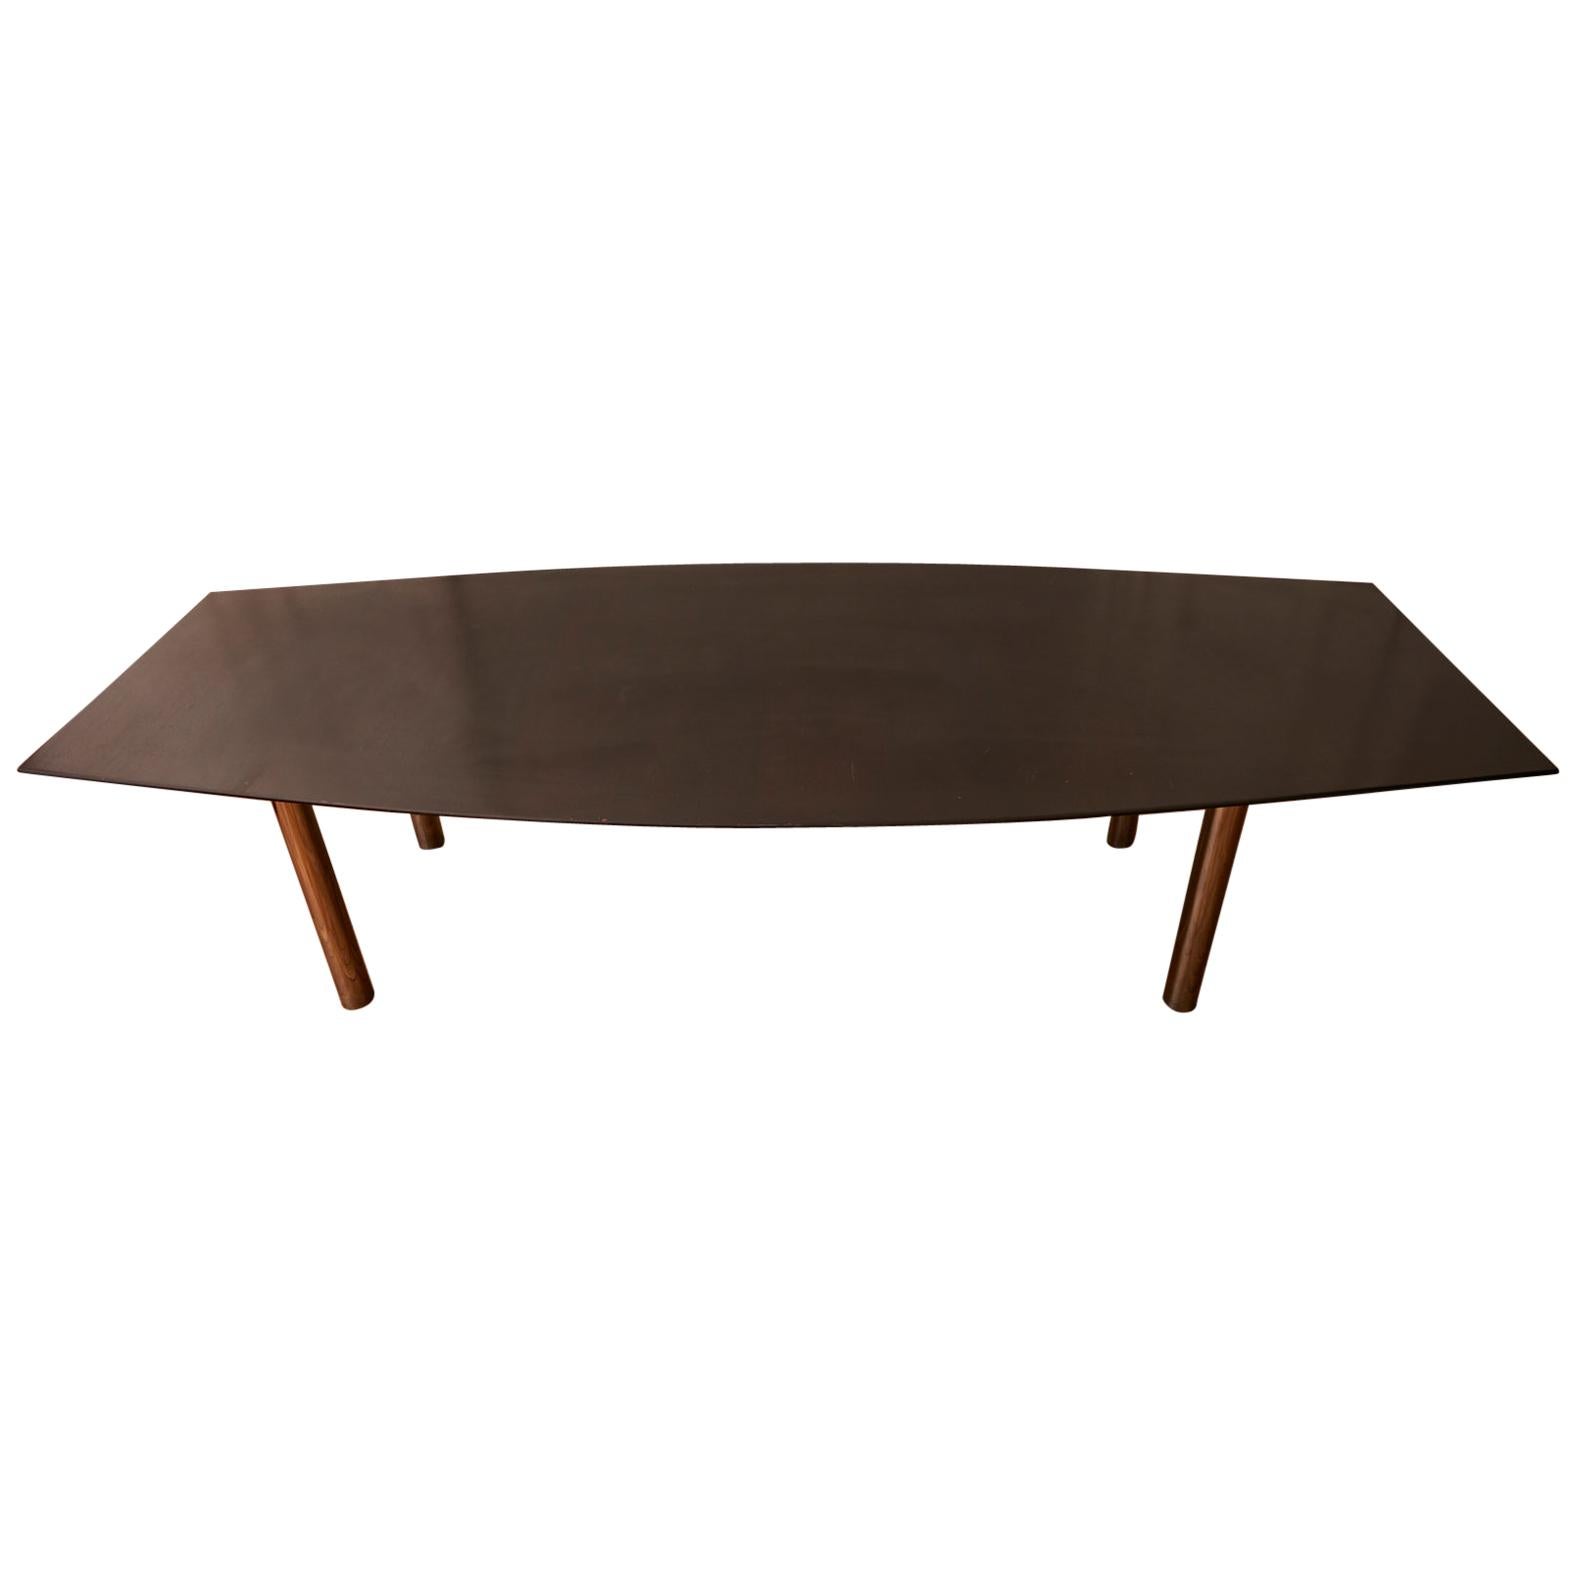 Large Mid-Century Modern Table with Boat Shaped Top by Florence Knoll